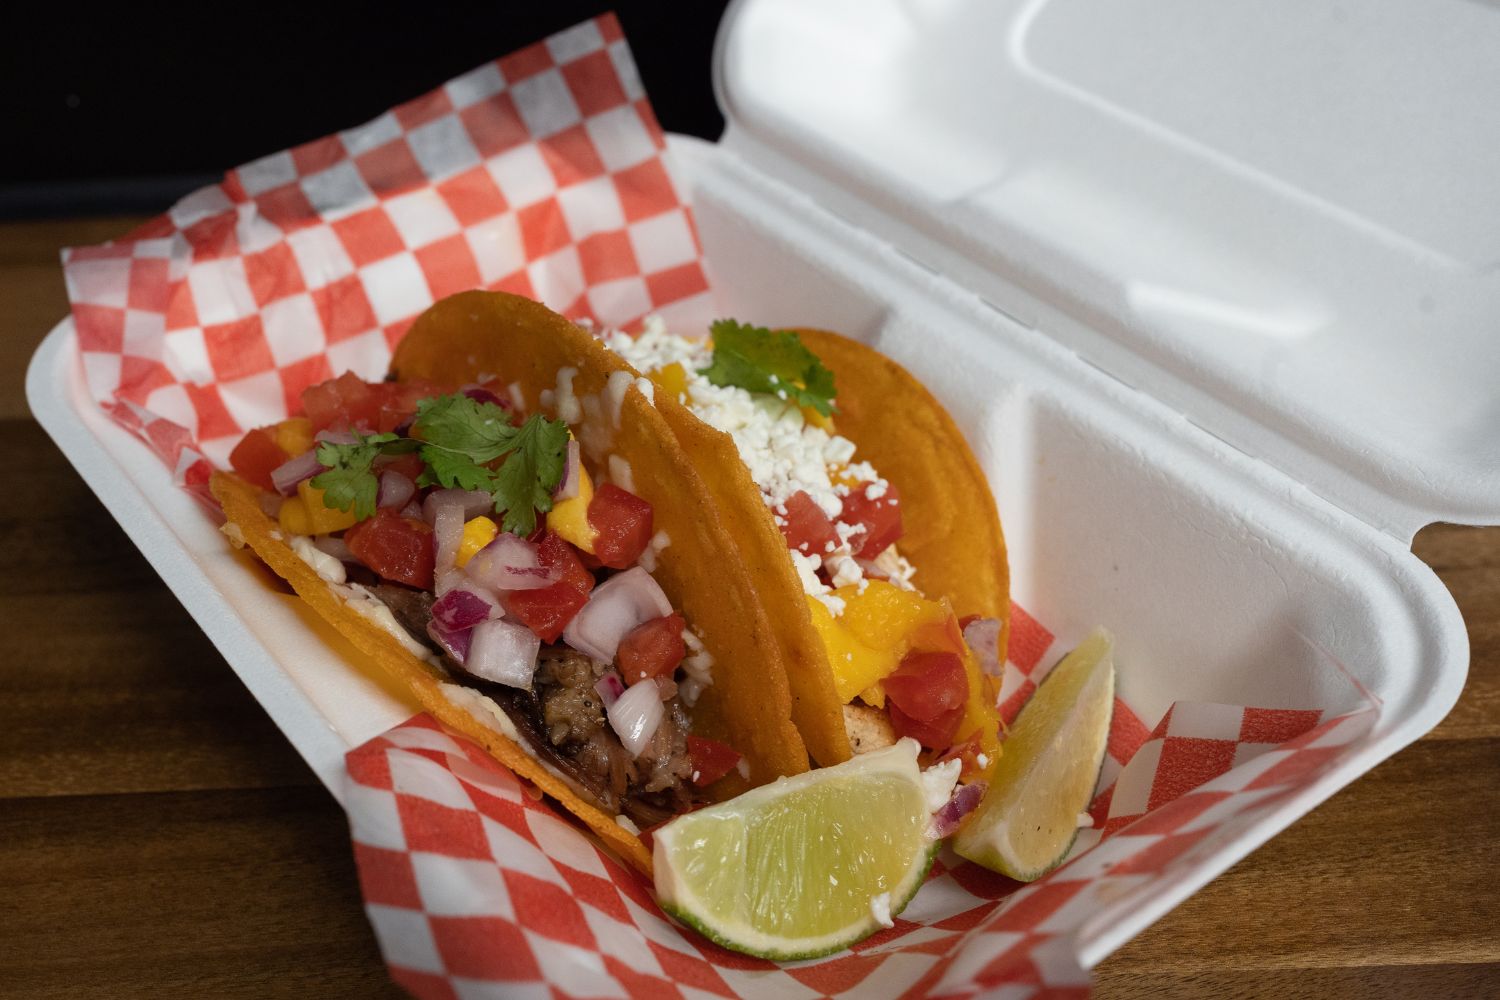 Alongside his fried chicken, Ngo serves up chicken and braised oxtail tacos, birria style, with goat cheese and bright mango pico de gallo. 